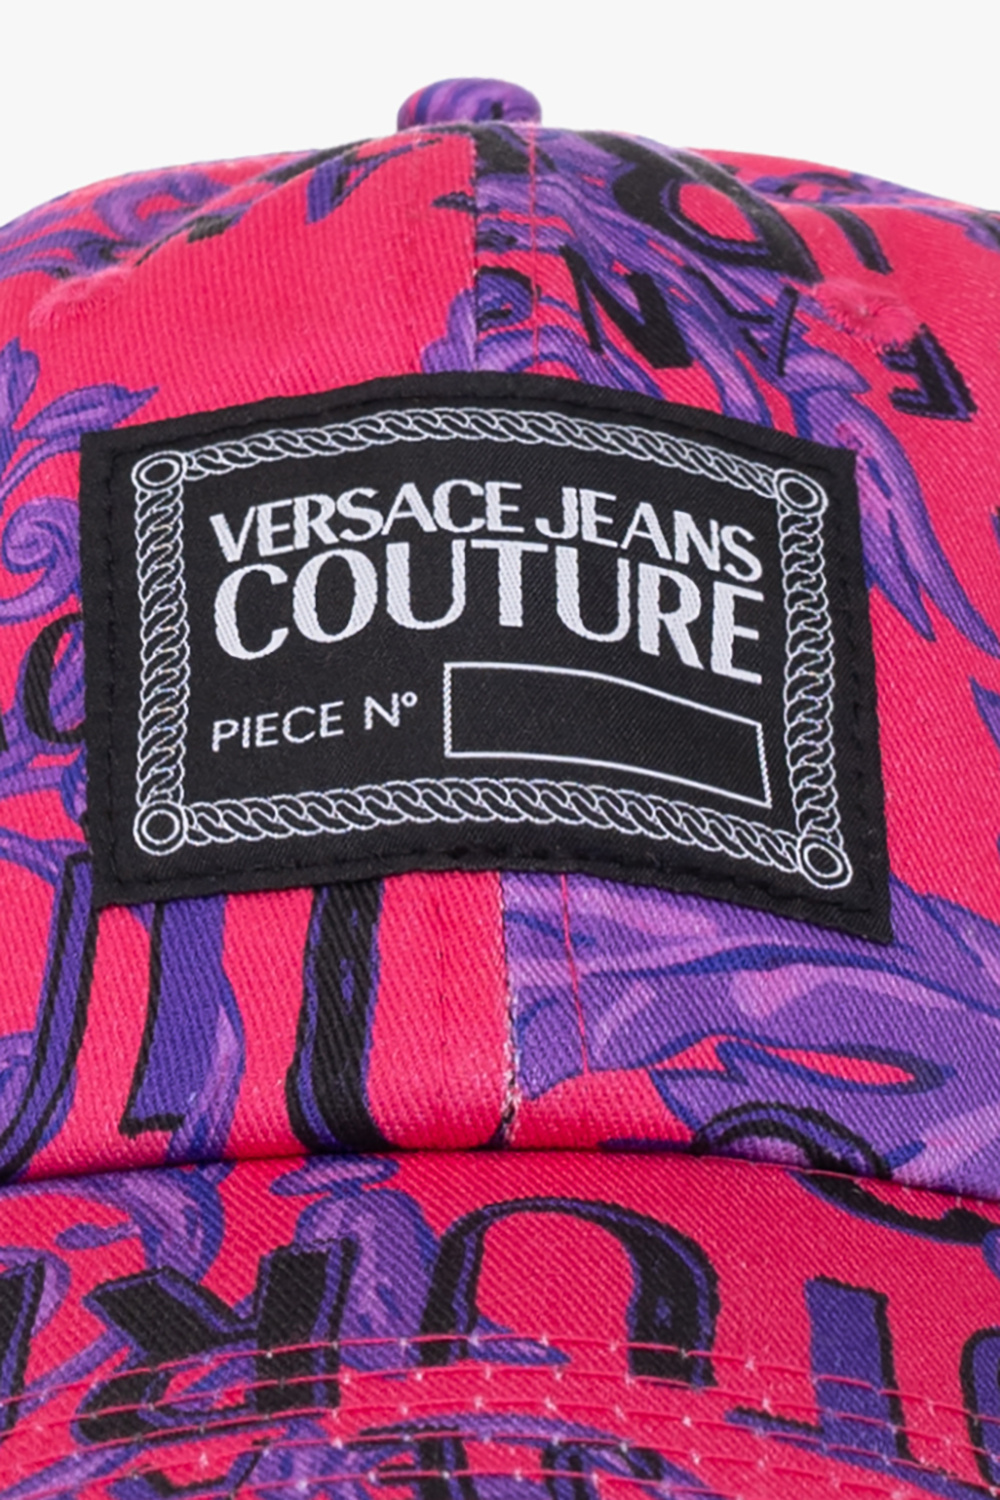 Versace Jeans Couture polo-shirts Silver robes s caps box cups clothing Socks